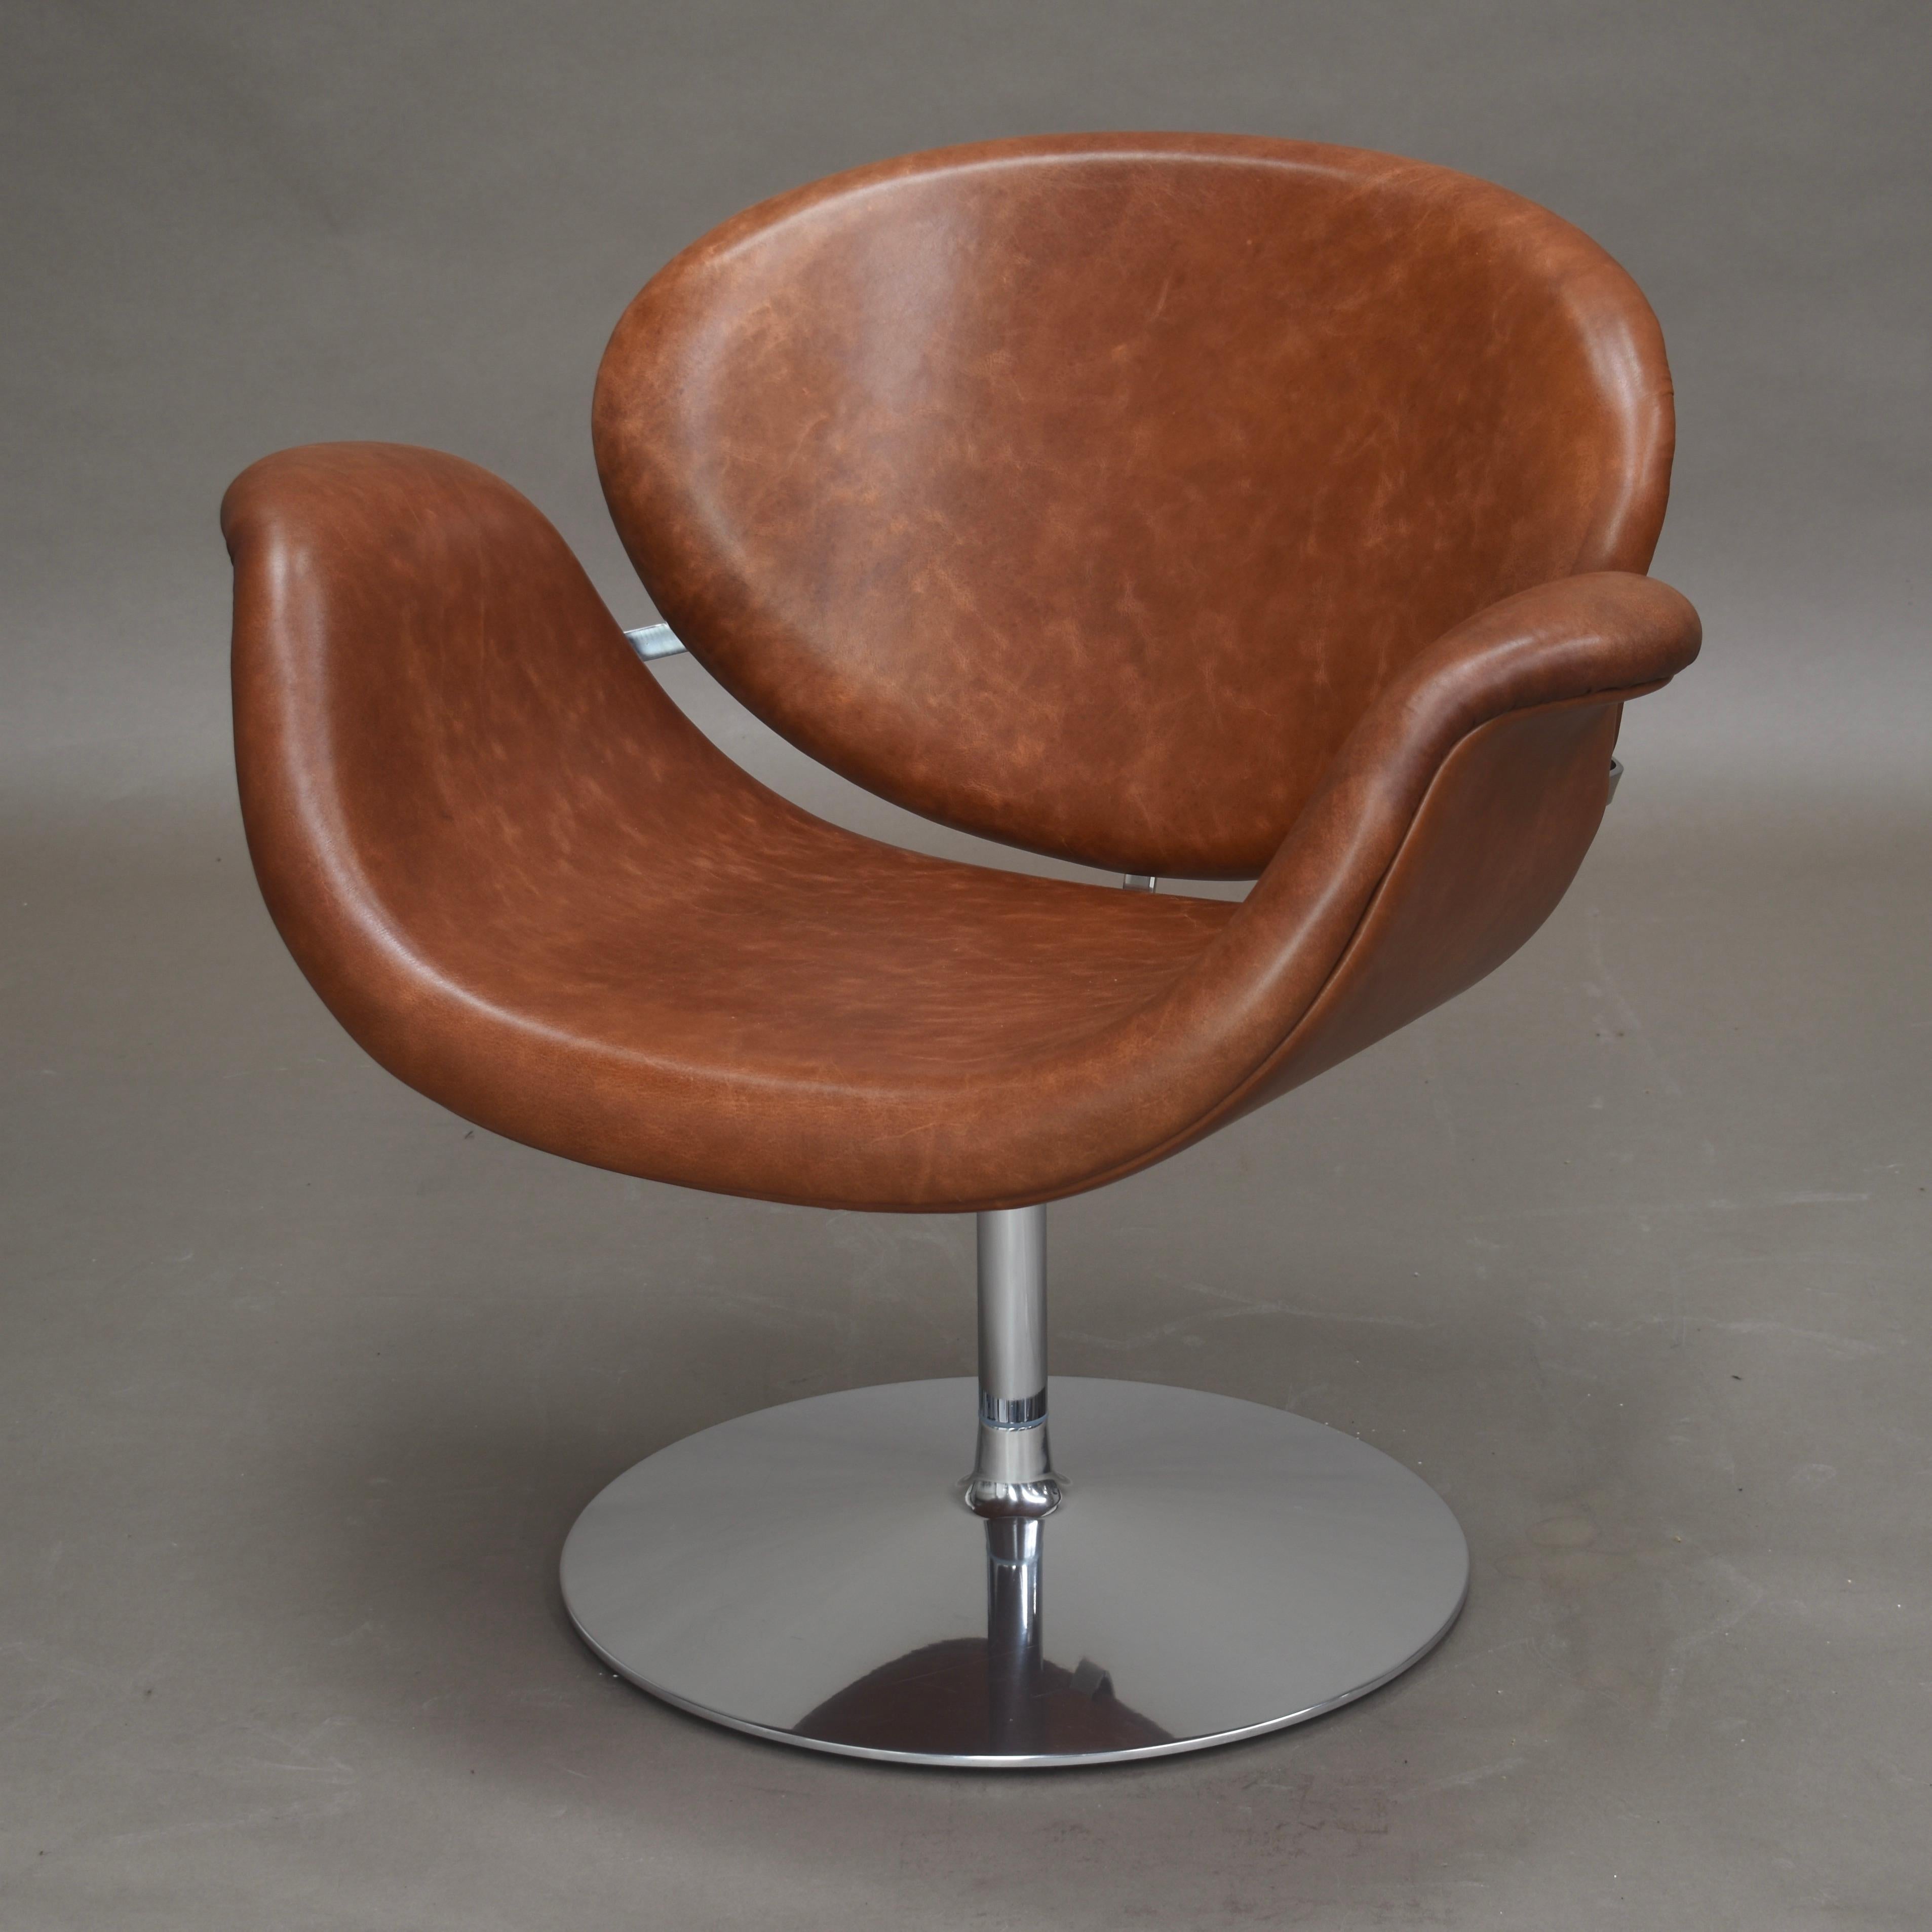 Iconic Tulip Midi swivel chair by Pierre Paulin for Artifort, Netherlands – 1960.
The chairs have been reupholstered by Artifort in a custom leather by Alphenberg.
This model is very comfortable and gives good ergonomic support, in particular to